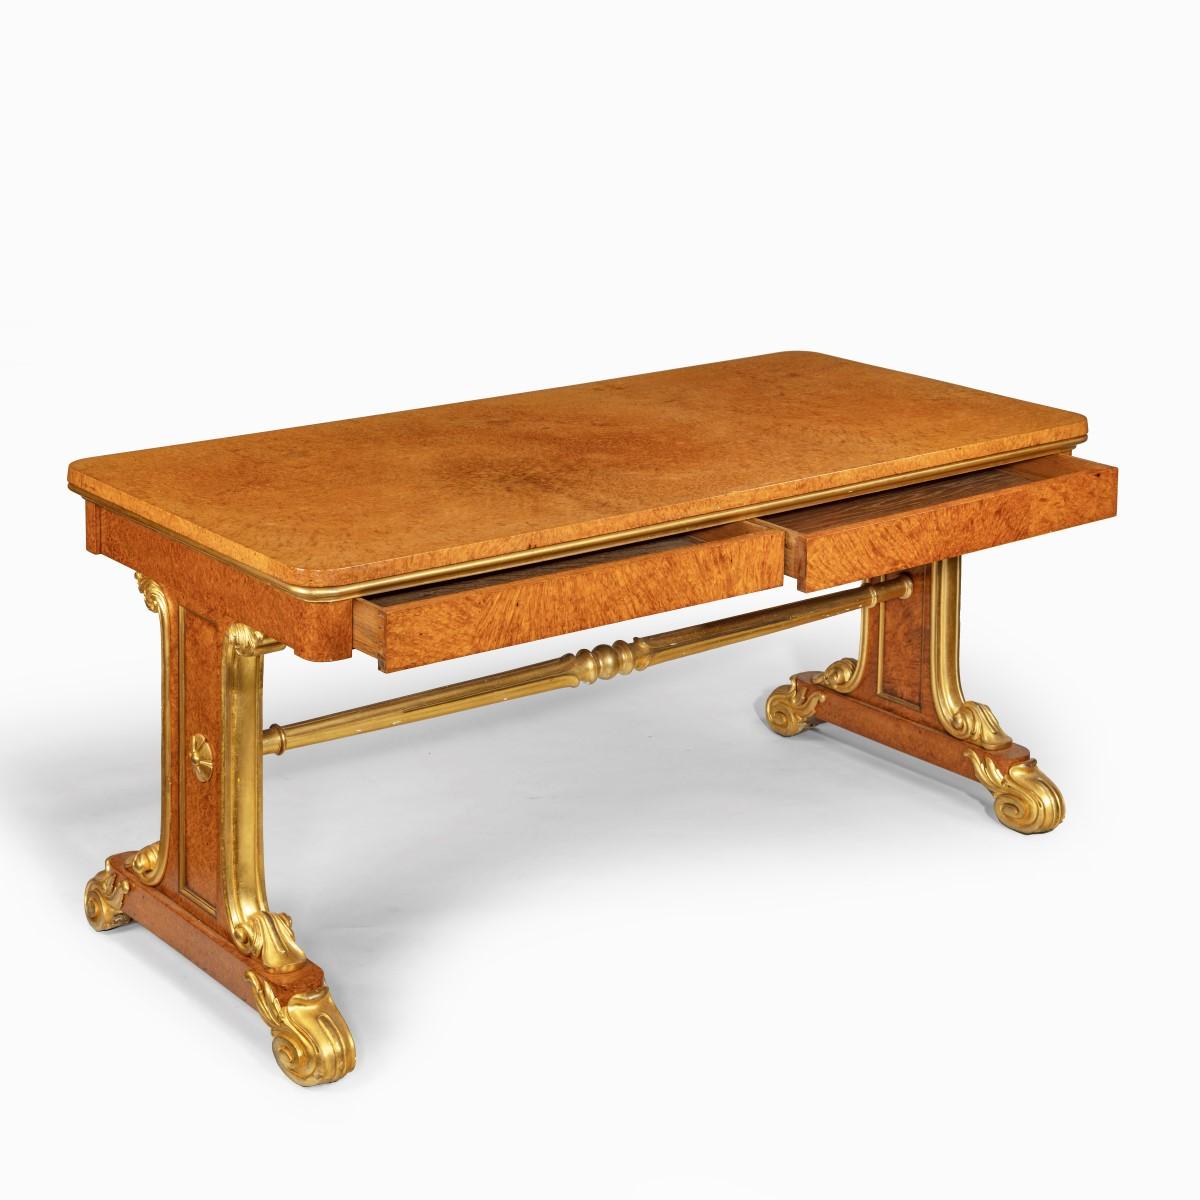 A Regency amboyna and gilt library table attributed to Seddon and Morel, with a rectangular top set upon solid end supports with a turned, reeded and gilded stretcher and gilded foliate scroll feet. It is decorated throughout with rich amboyna